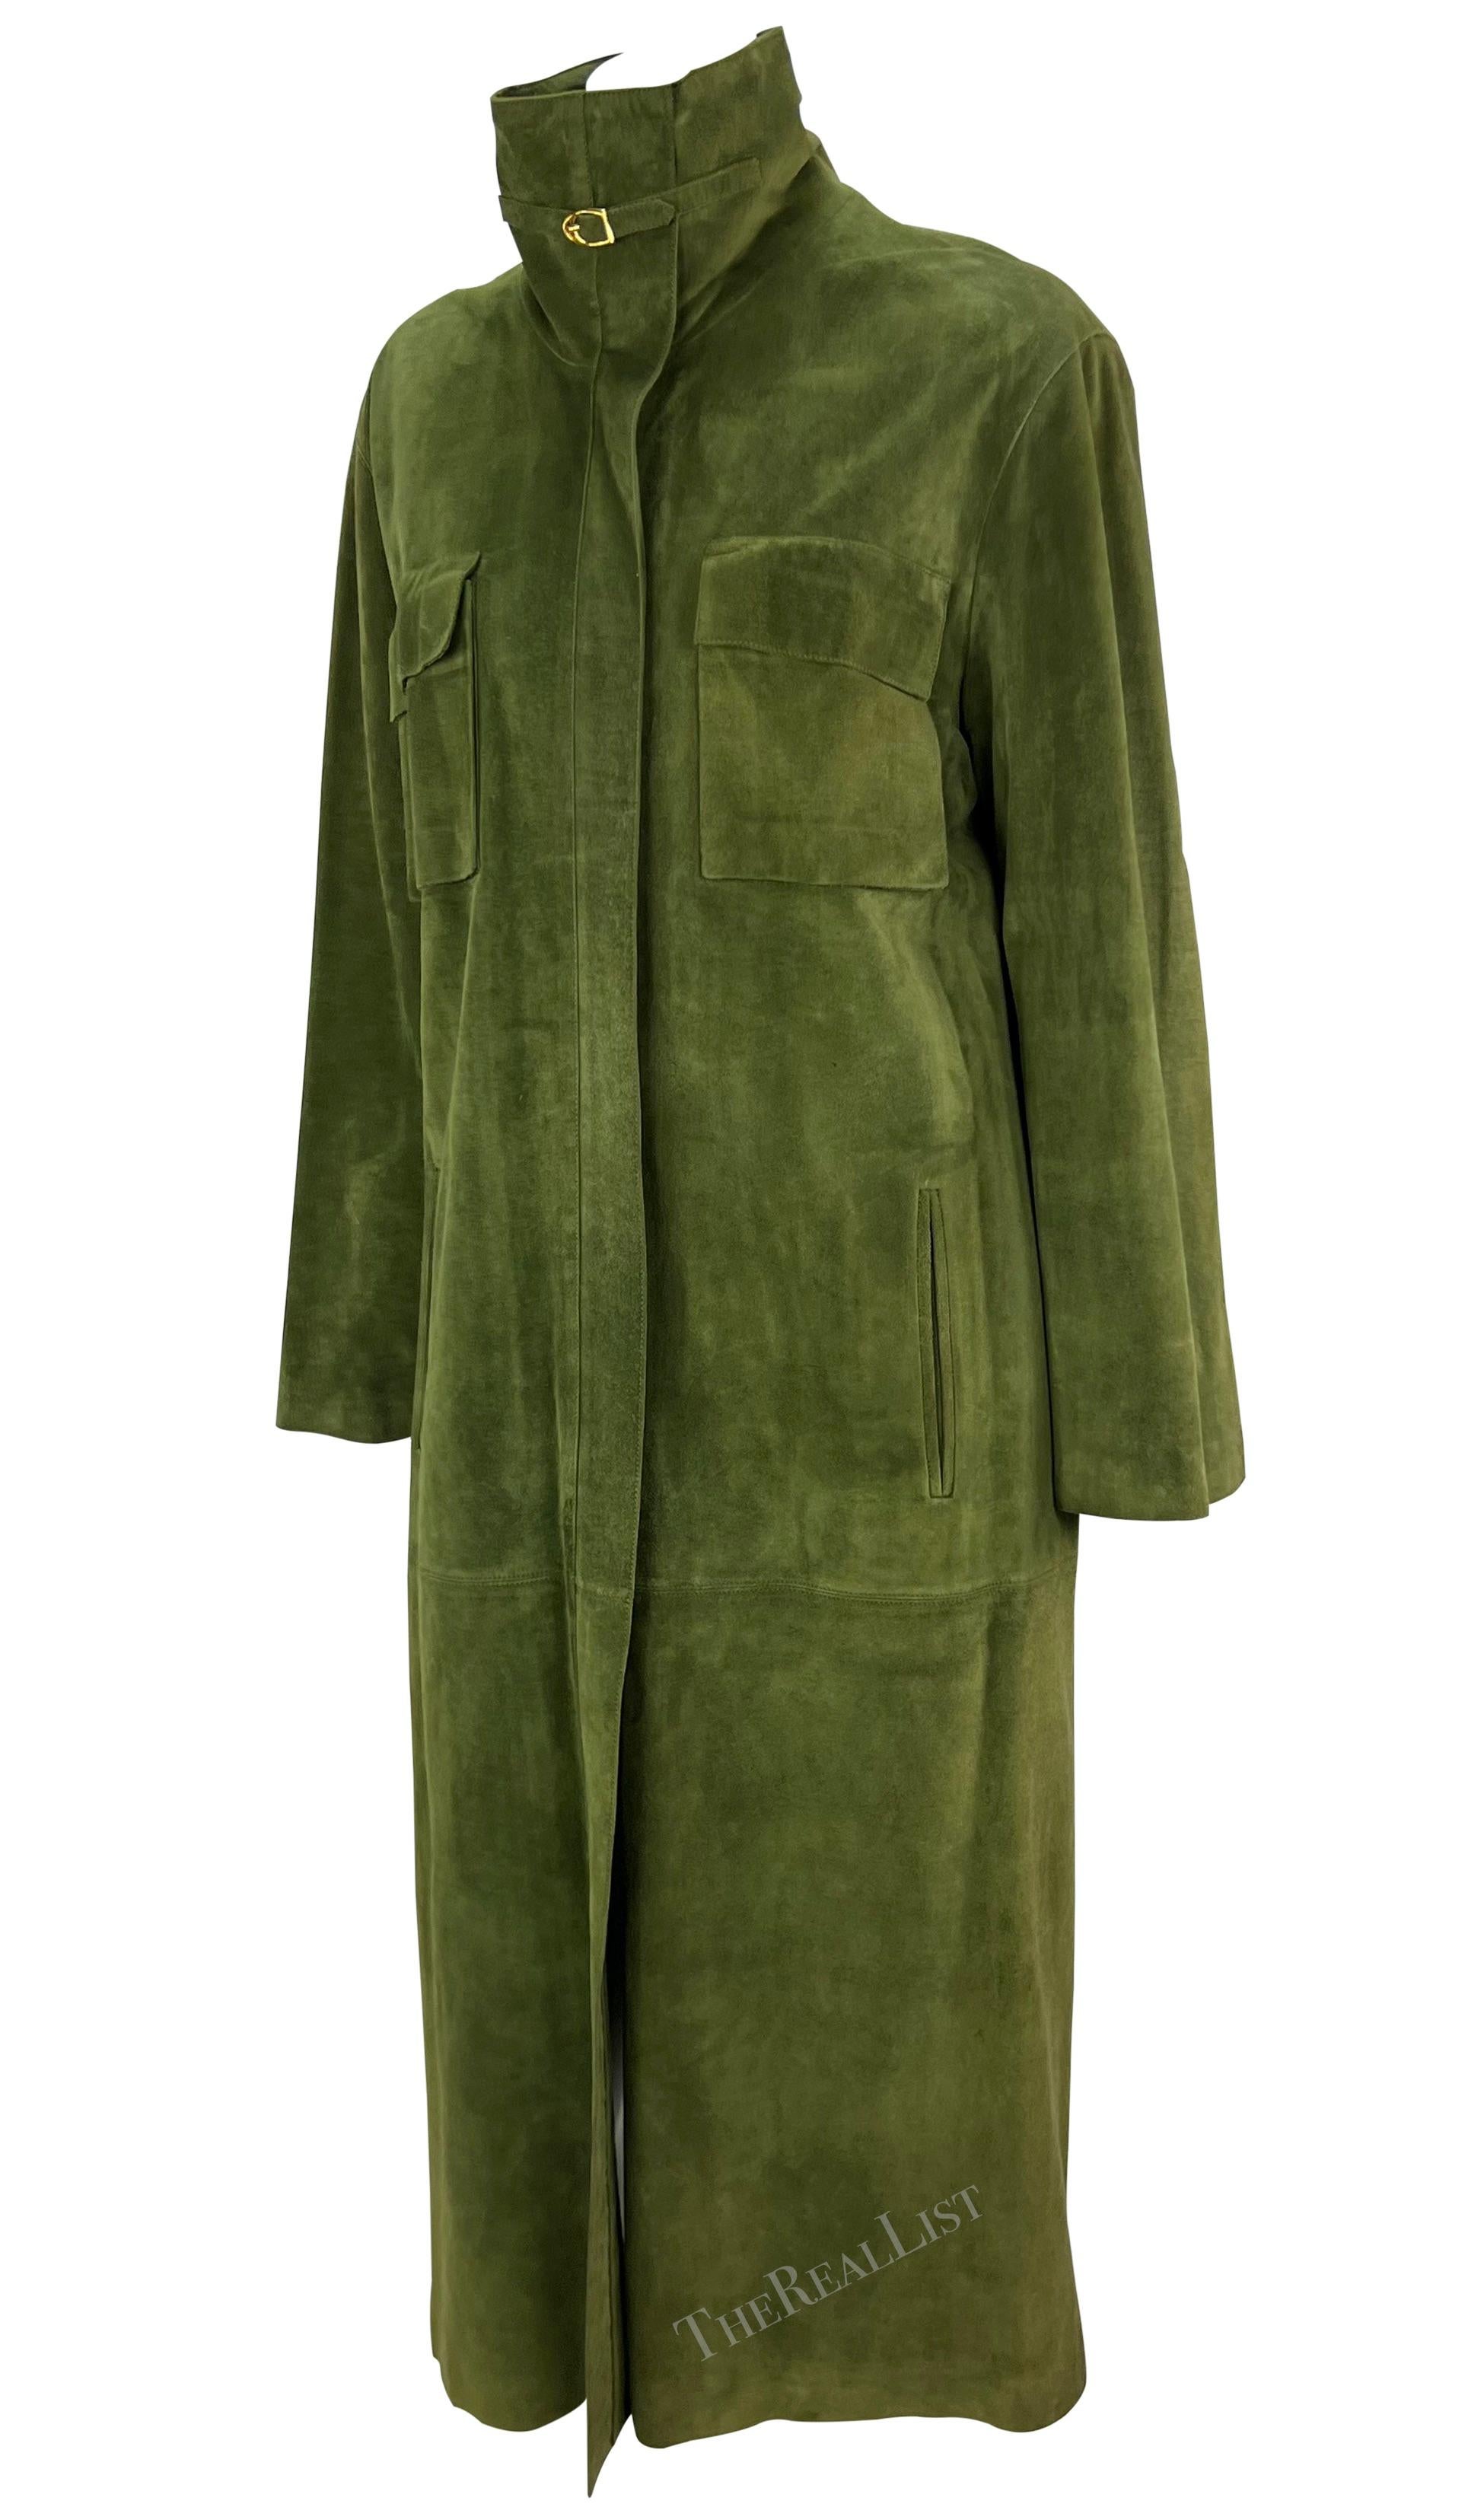 Presenting a stunning mossy green suede Gucci trench coat. From the 1970s, this true vintage coat is constructed entirely of soft mossy green suede. This oversized coat features a hidden zipper closure, pockets at the bust, and hips. This chic coat